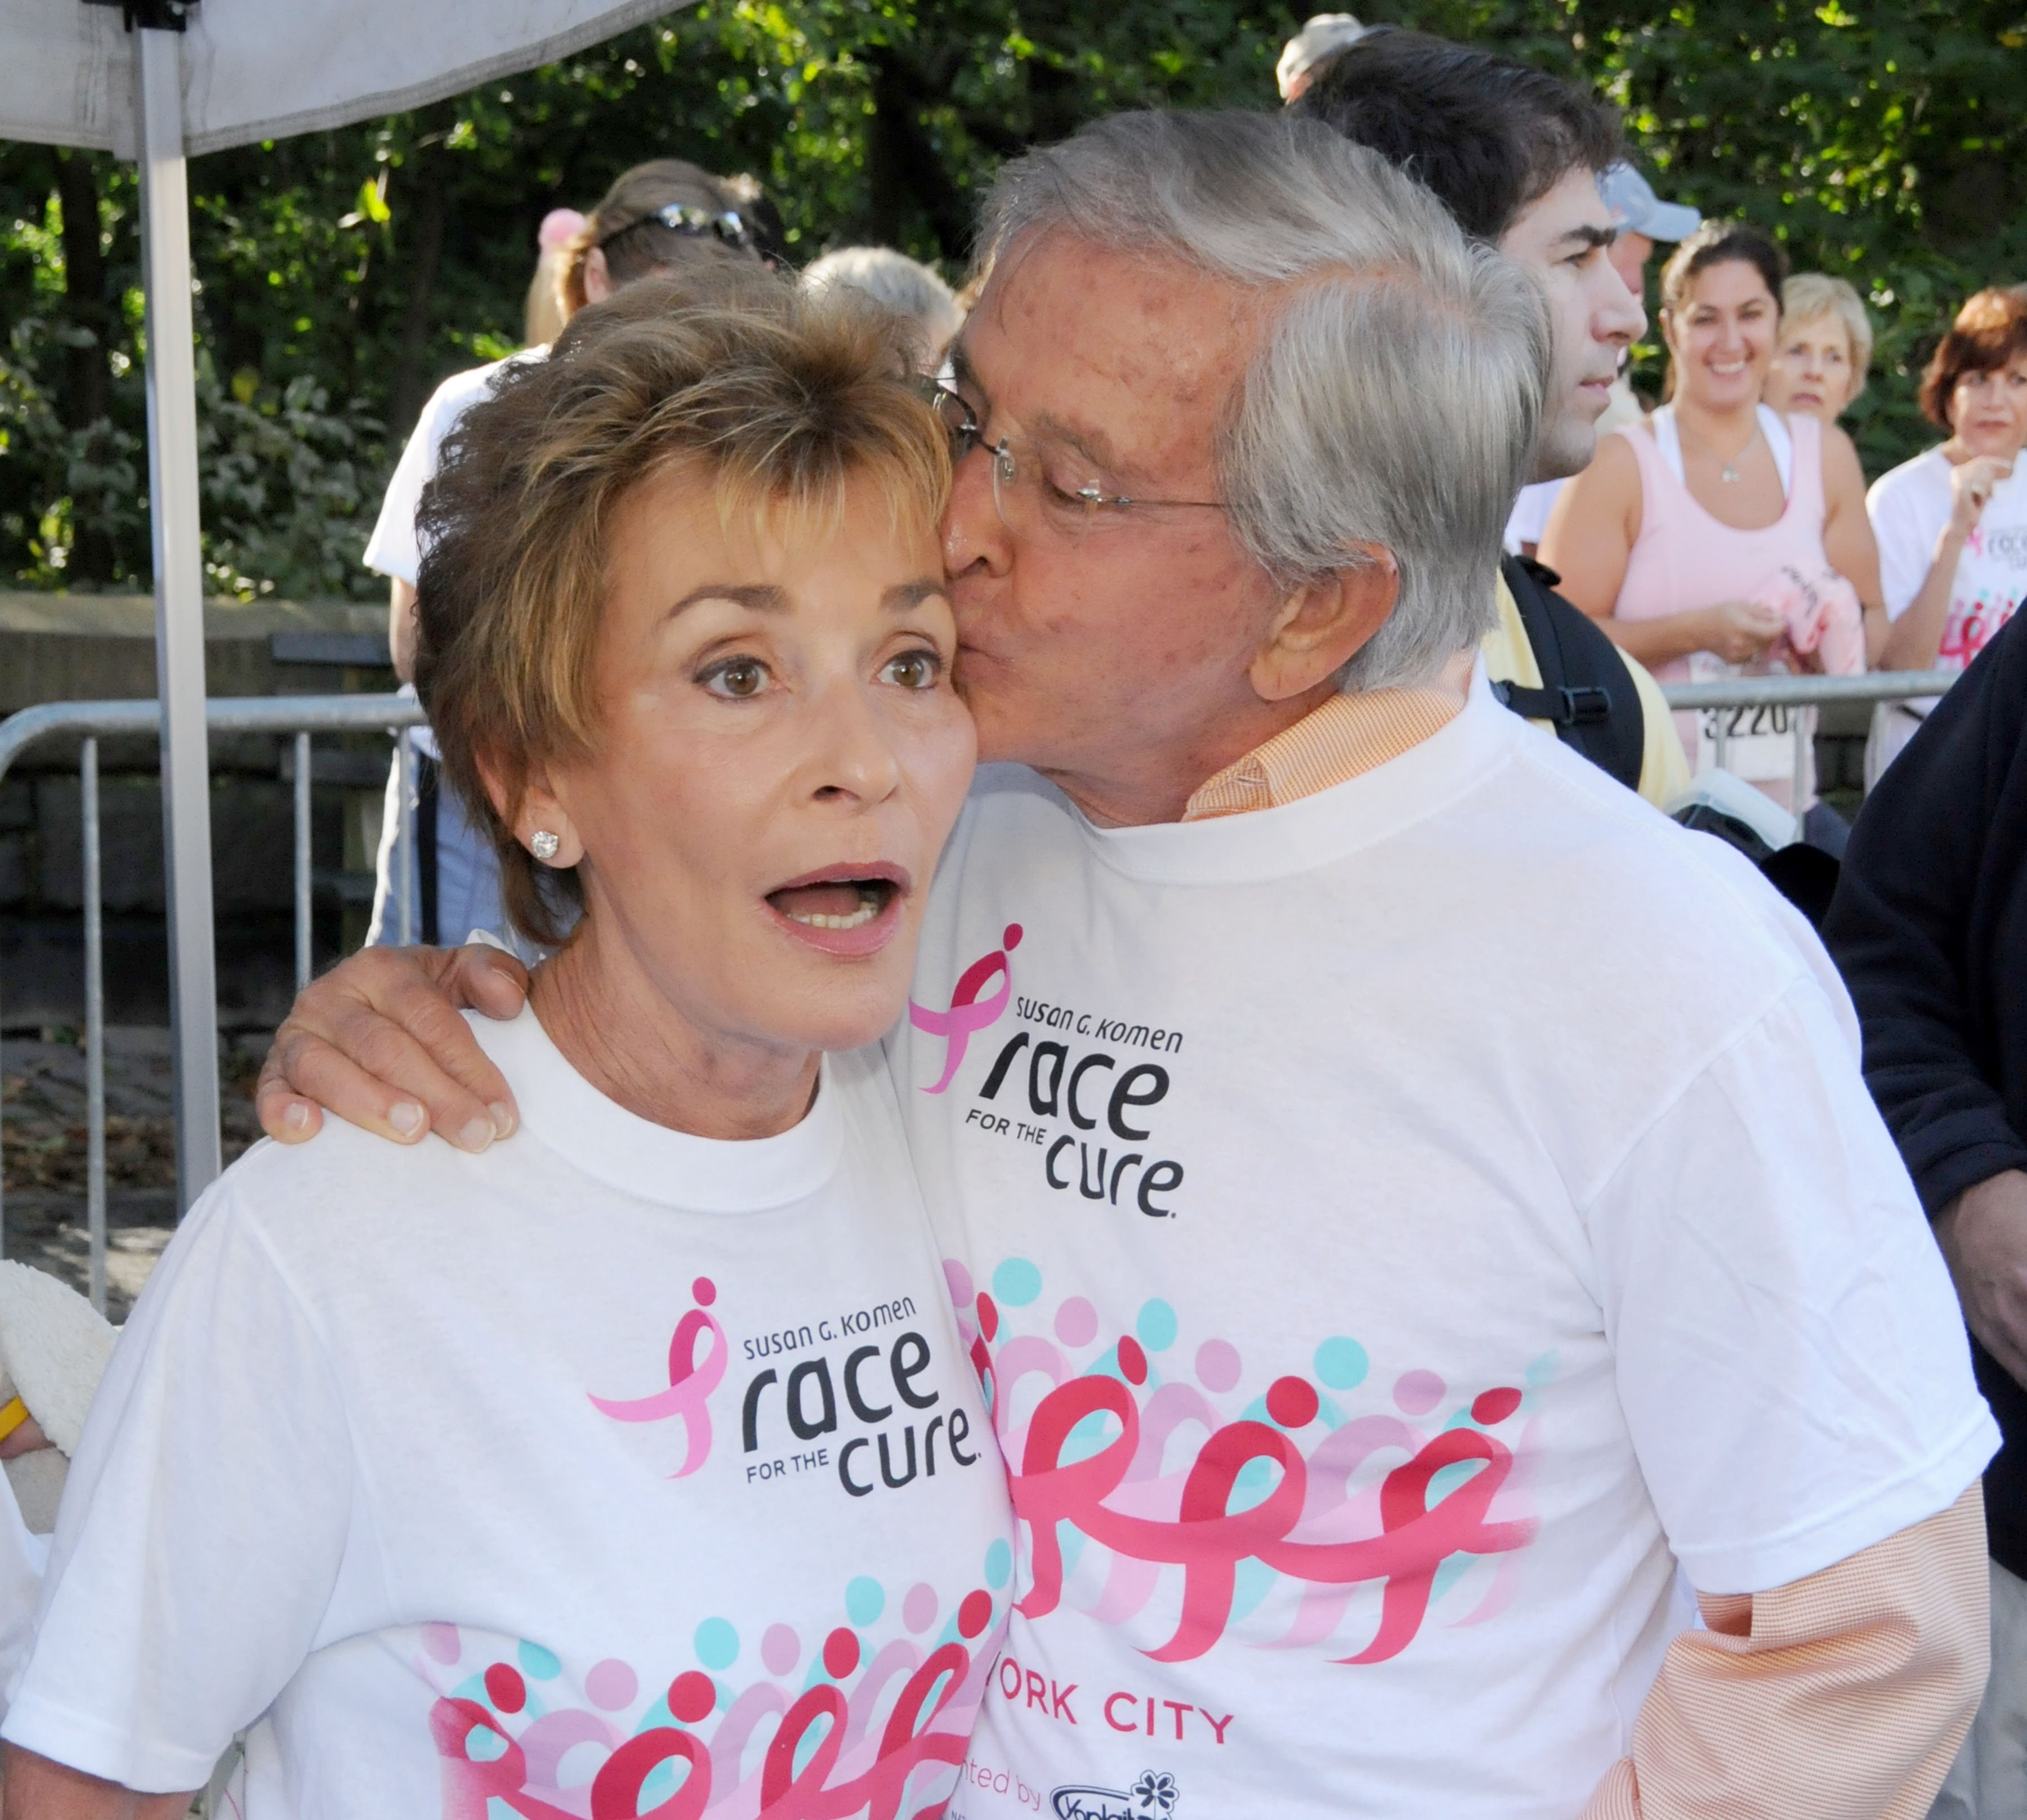 Judy Sheindlin and Jerry Sheindlin at the Susan G. Komen New York City Race For The Cure 2009 held at Central Park in New York, New York on September 13, 2009 | Source: Getty Images